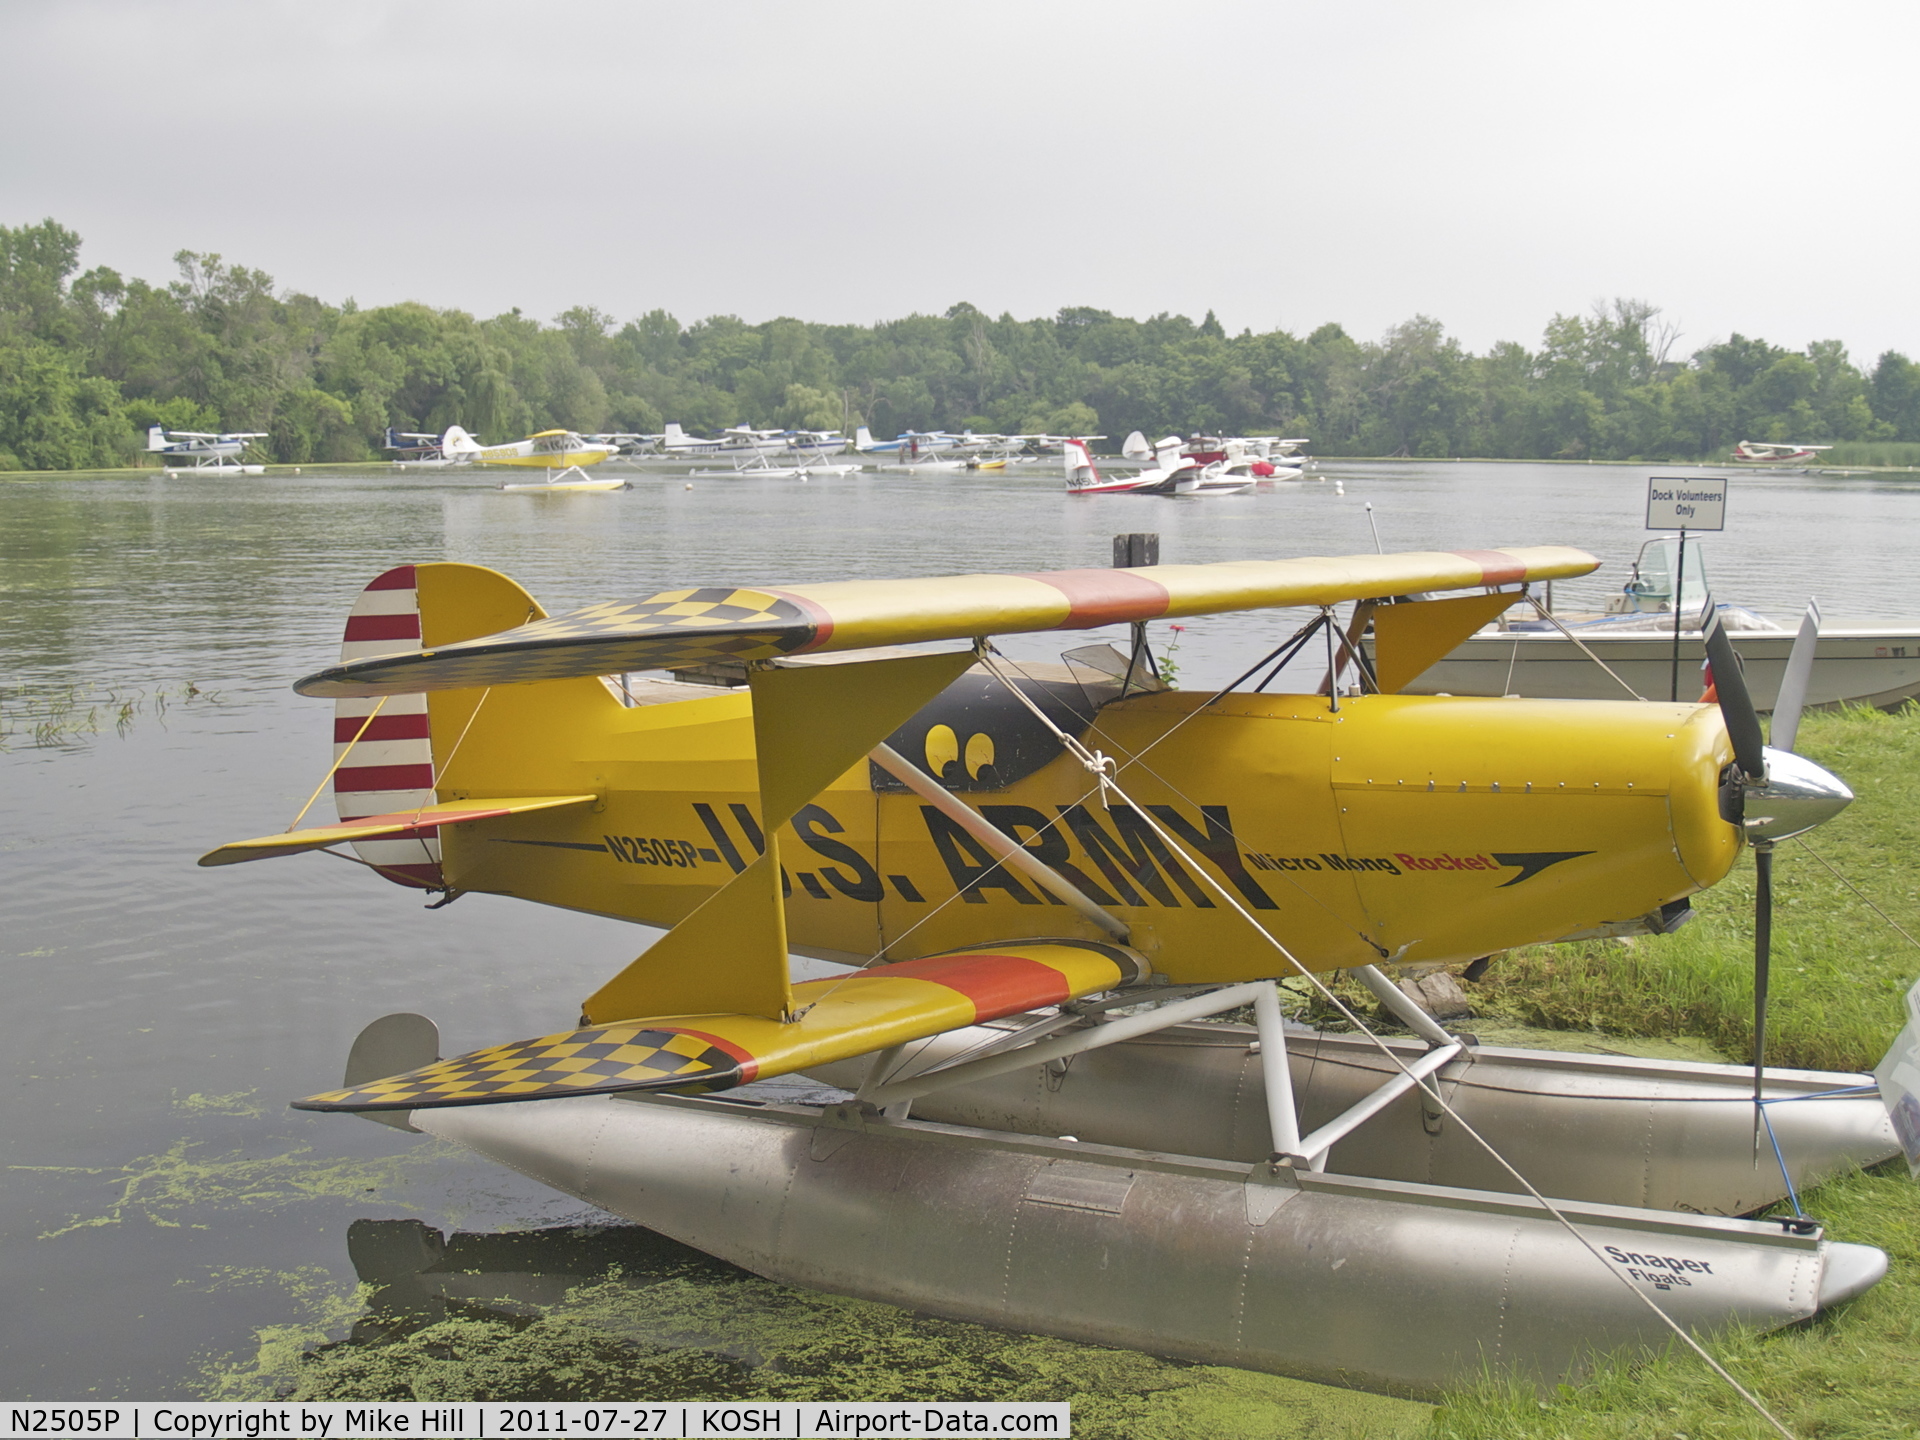 N2505P, 2008 Green Sky Adventures Micro Mong C/N 32, Aircraft moored at the Airventure Seaplane Base - July 2011